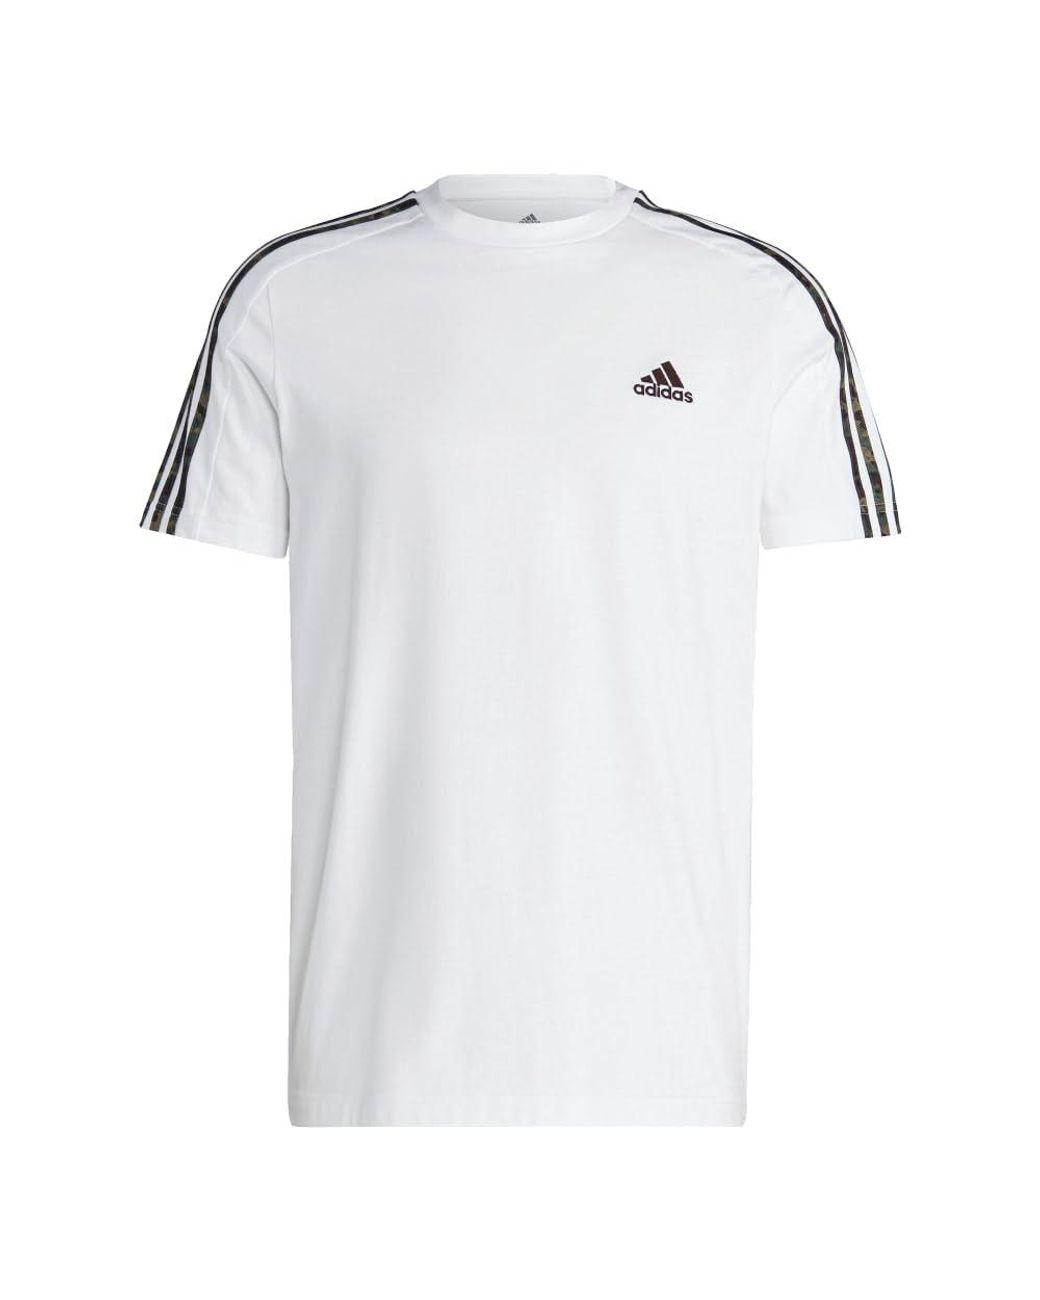 adidas Essentials Lyst Men White Single T-shirt 3-stripes | Jersey in for